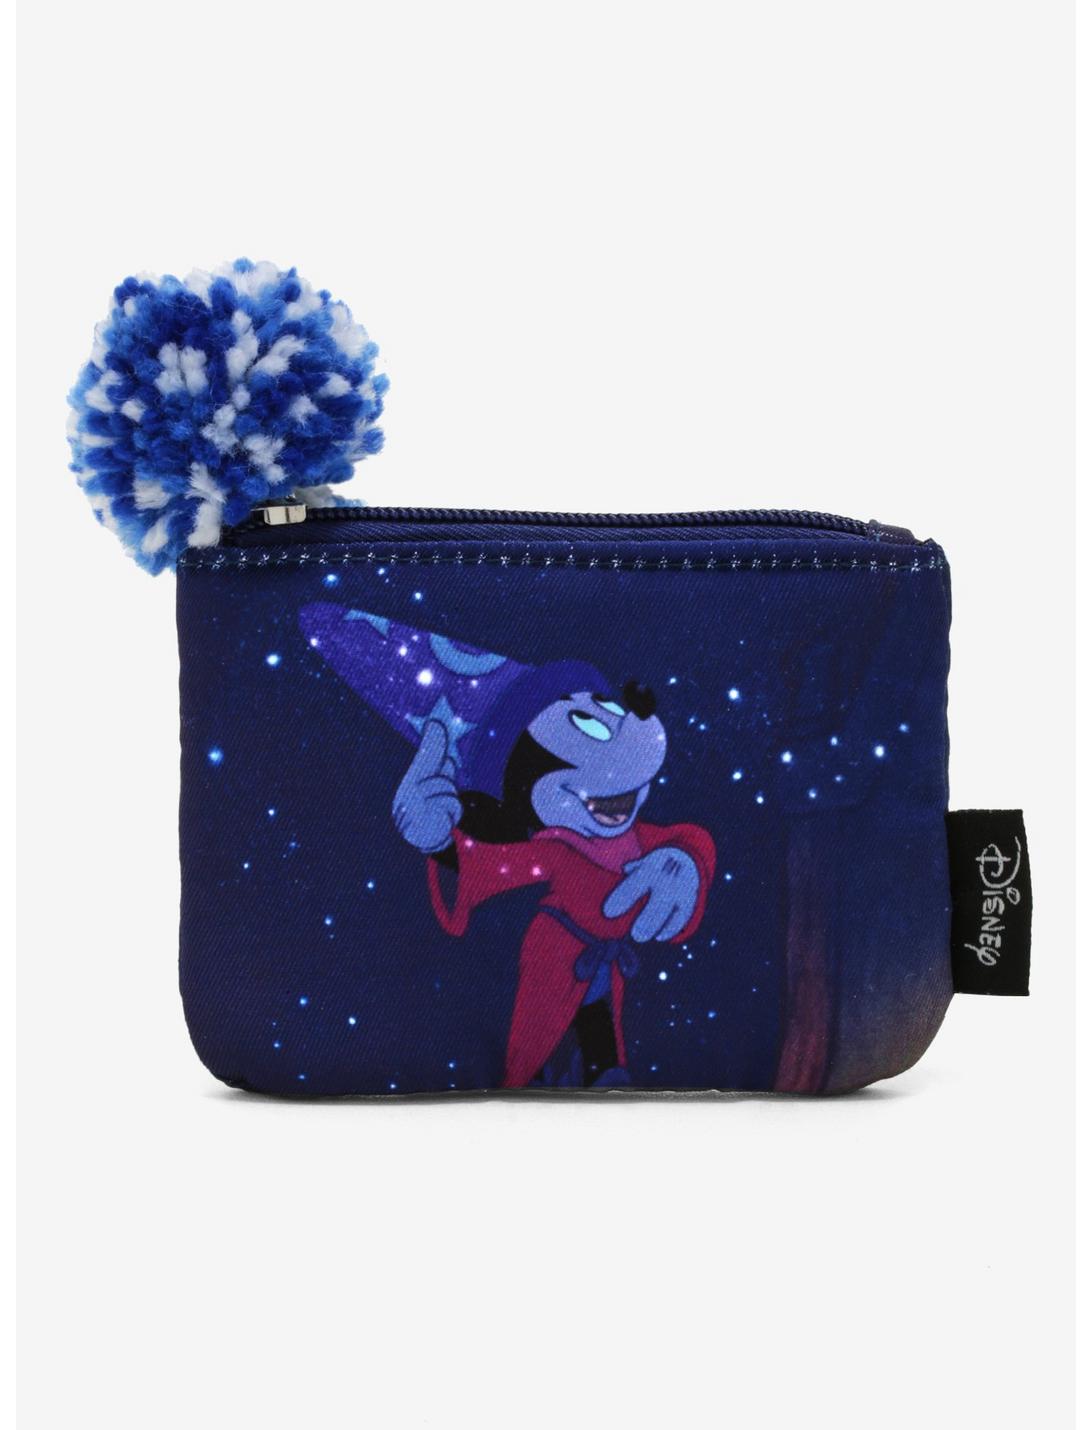 Loungefly Disney Fantasia Sorcerer Mickey Coin Purse - BoxLunch Exclusive, , hi-res